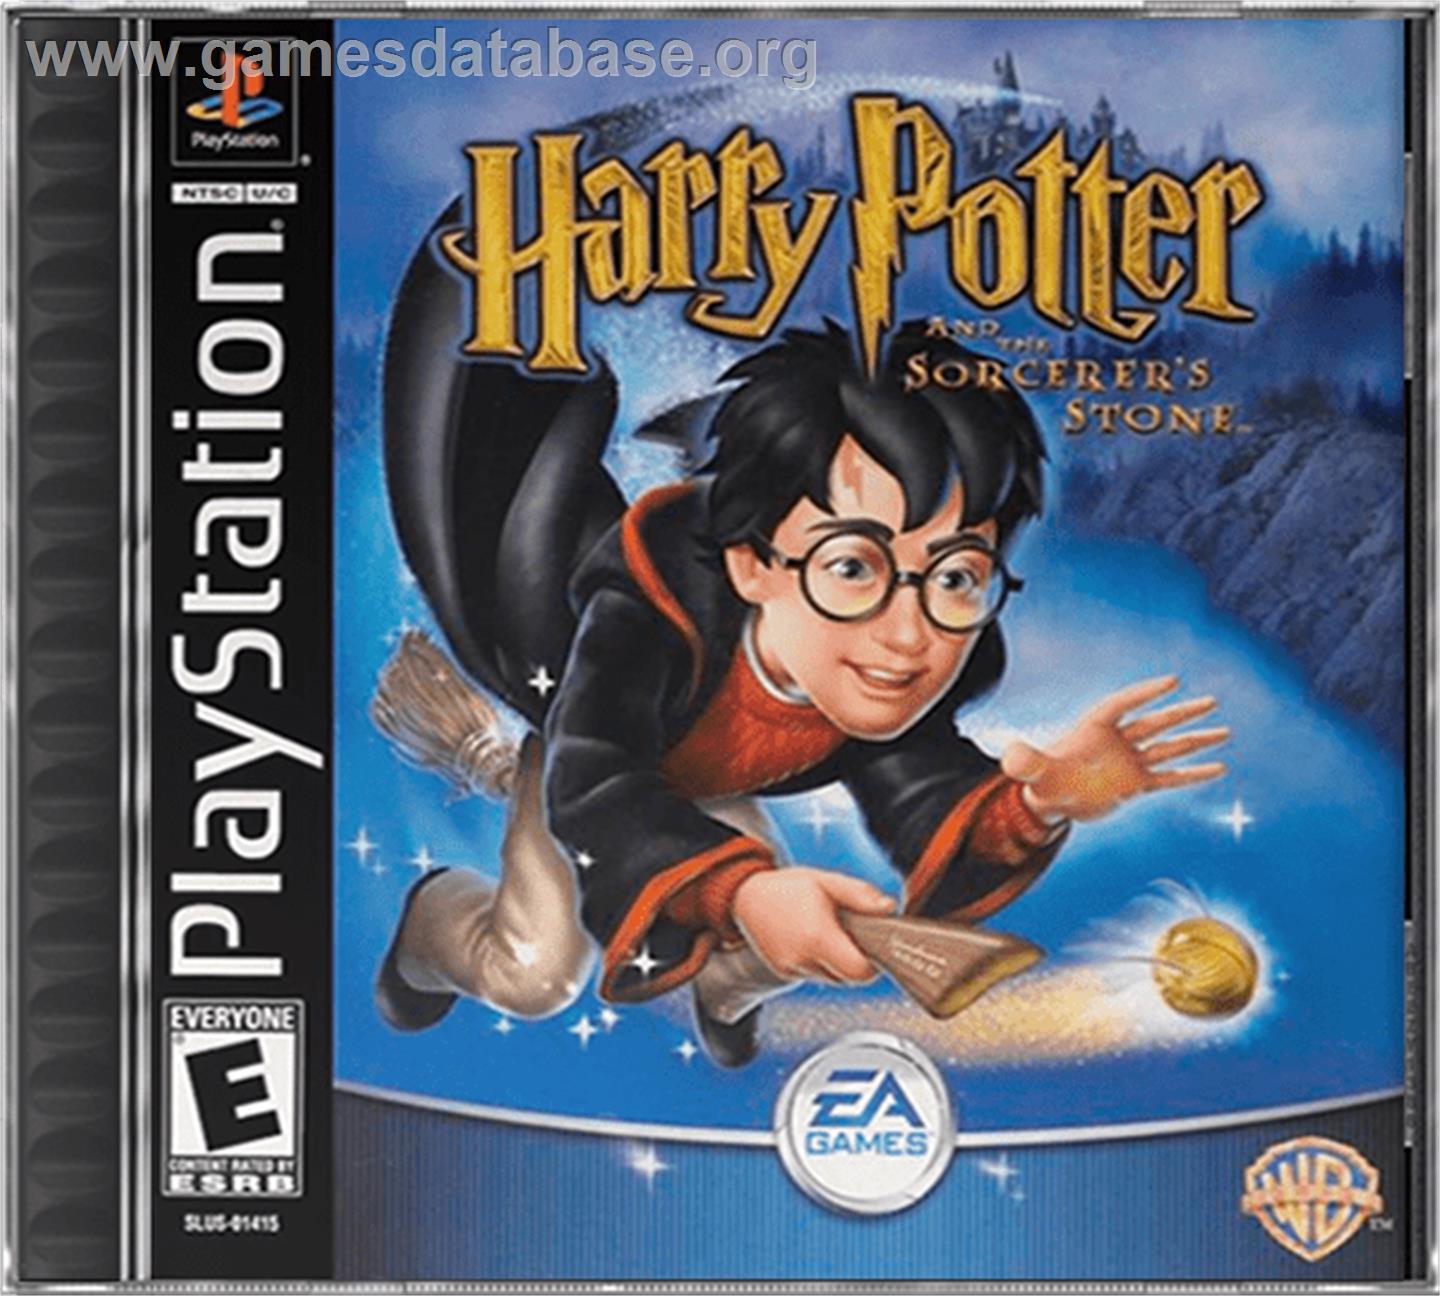 Harry Potter and the Sorcerer's Stone - Sony Playstation - Artwork - Box